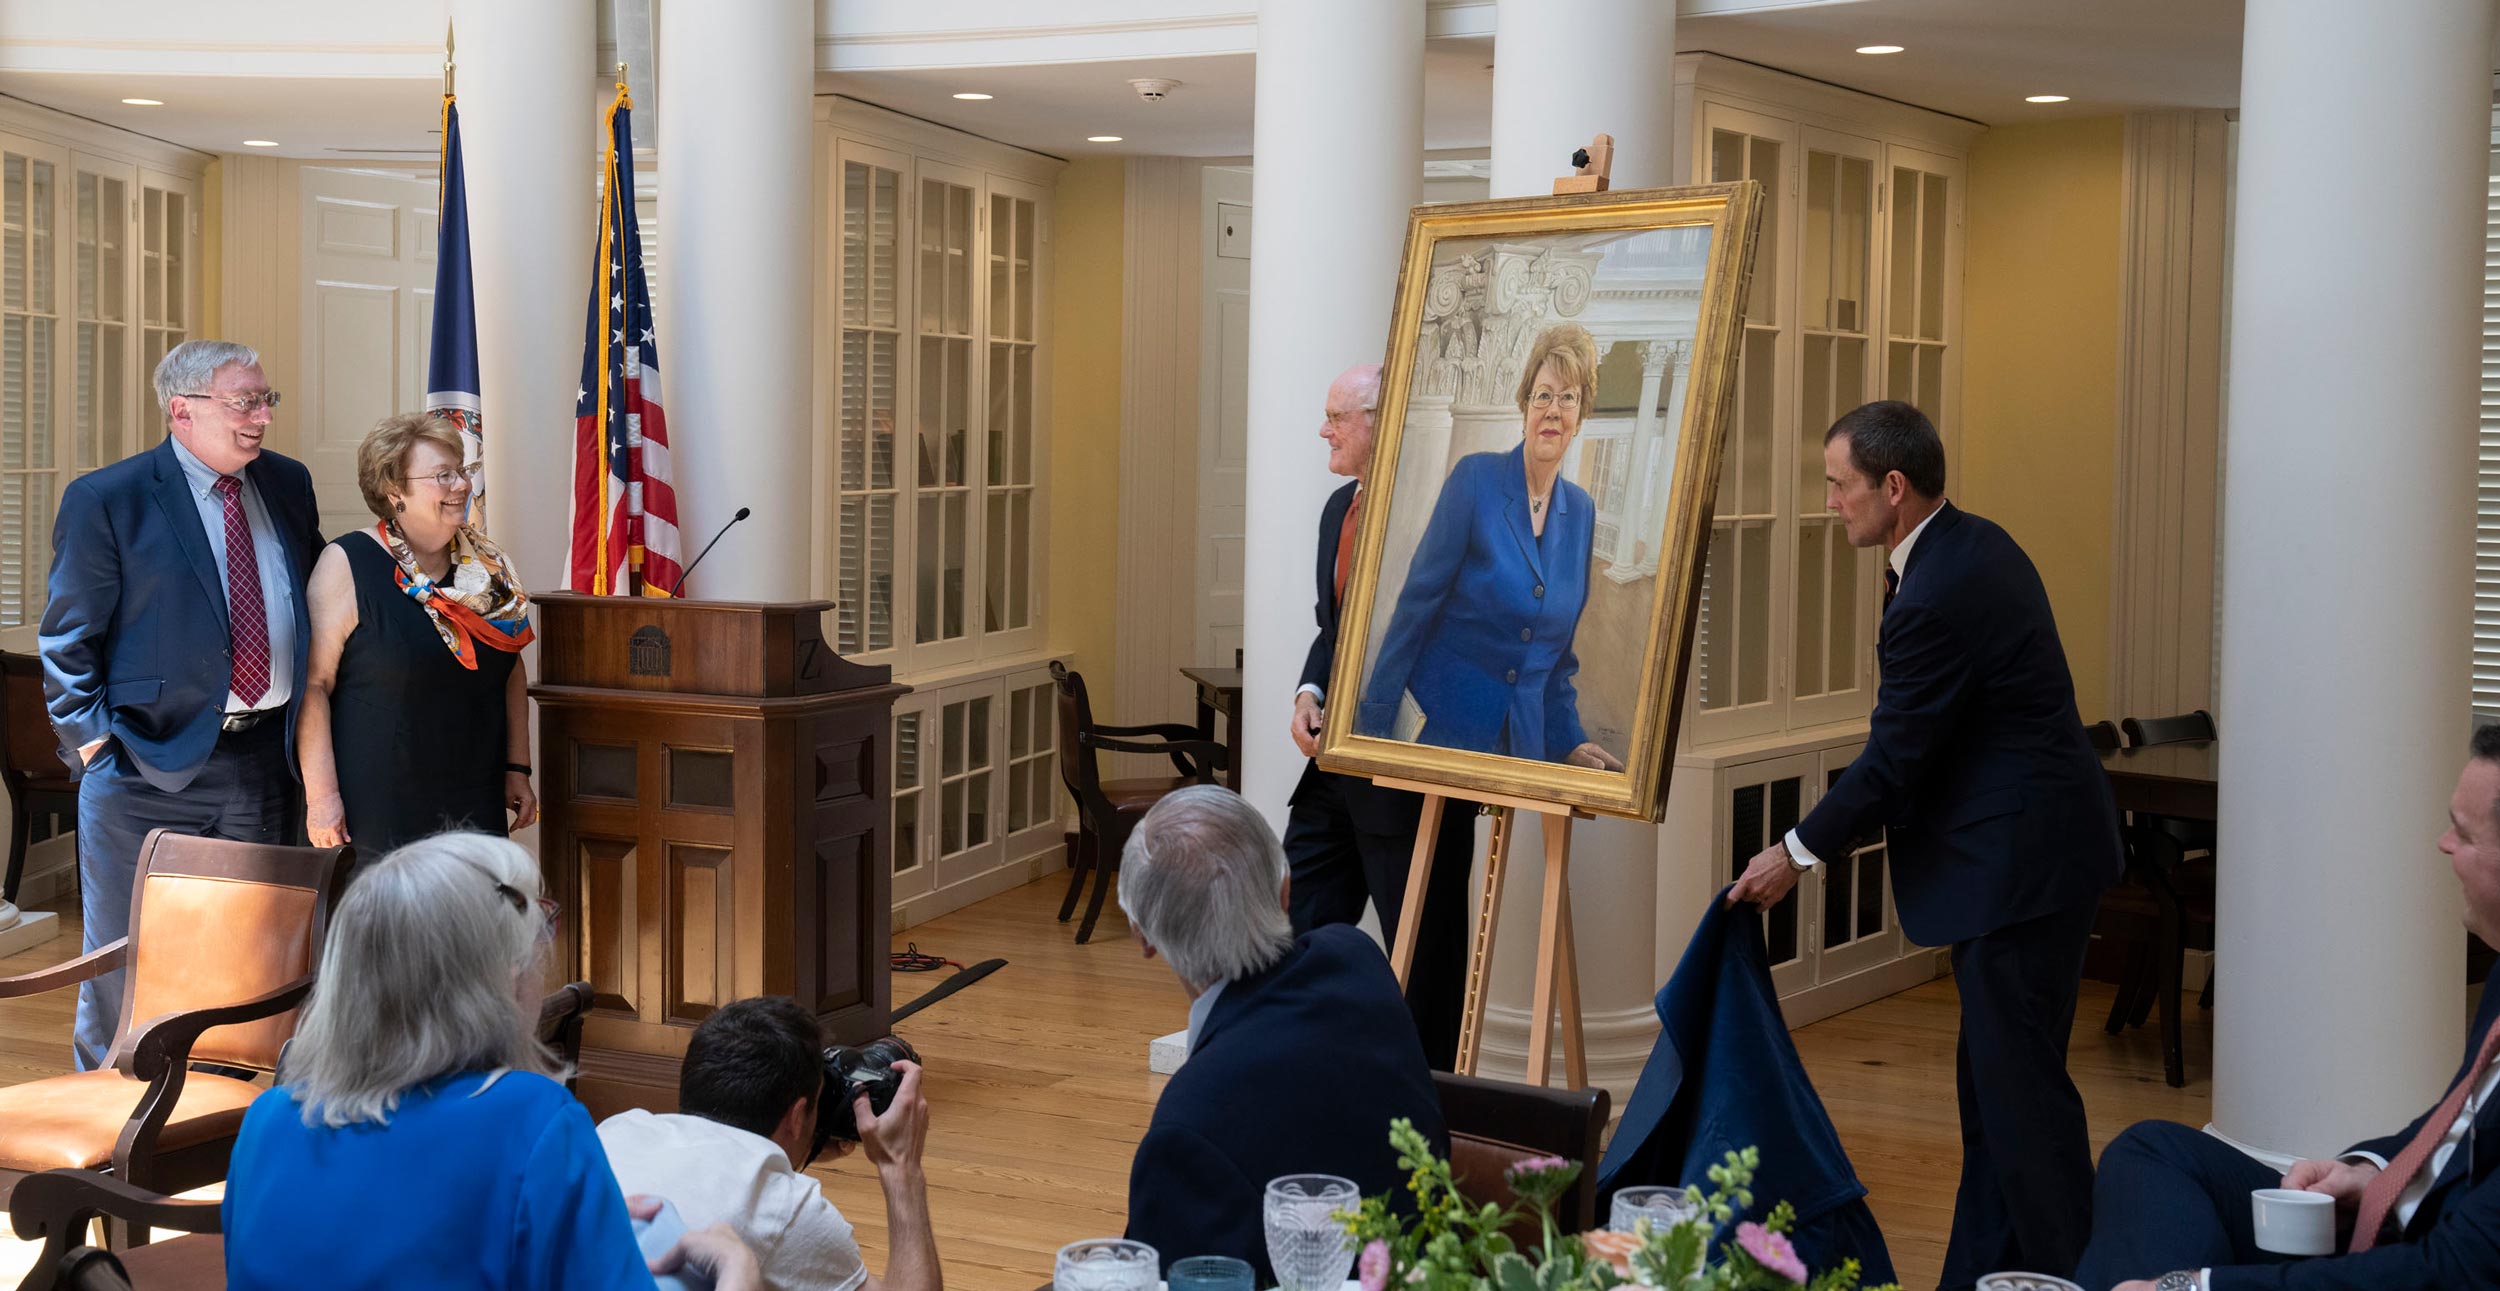 President Ryan presenting Sullivan portrait to her and other viewers